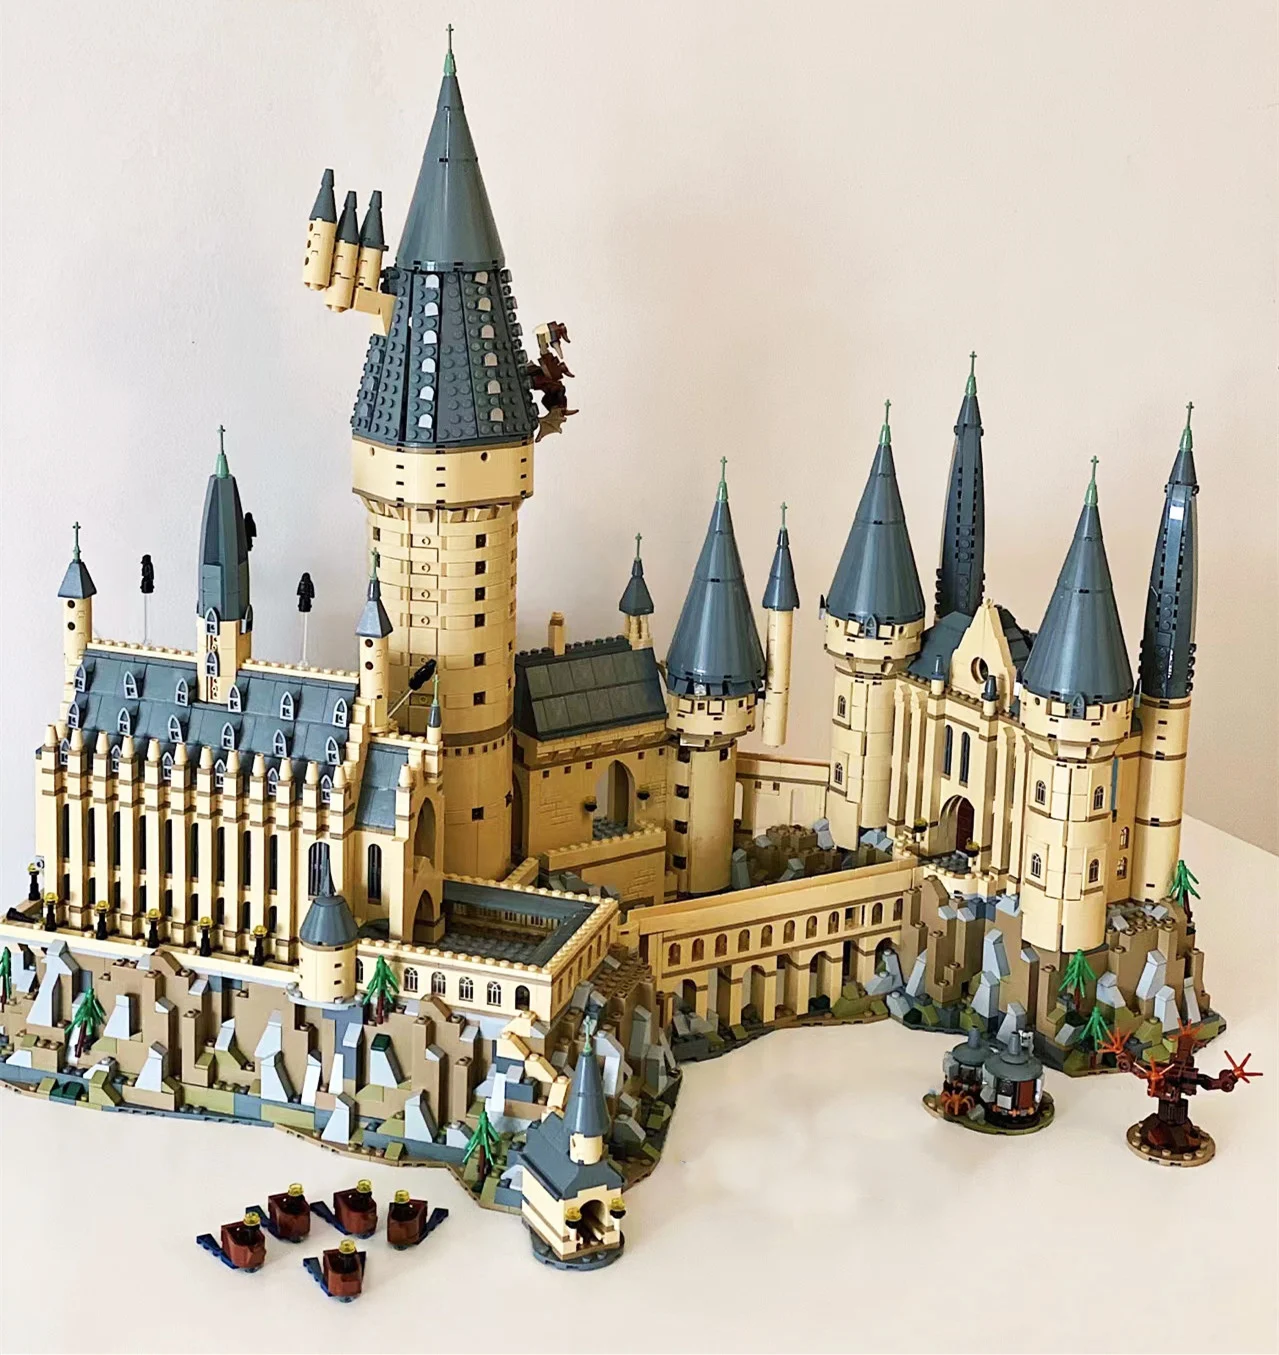 

Castle Harris Forbidden Forest Potter Series Movie Toys Compatible With 16060 Building Blocks Children's Christmas New Year Gift